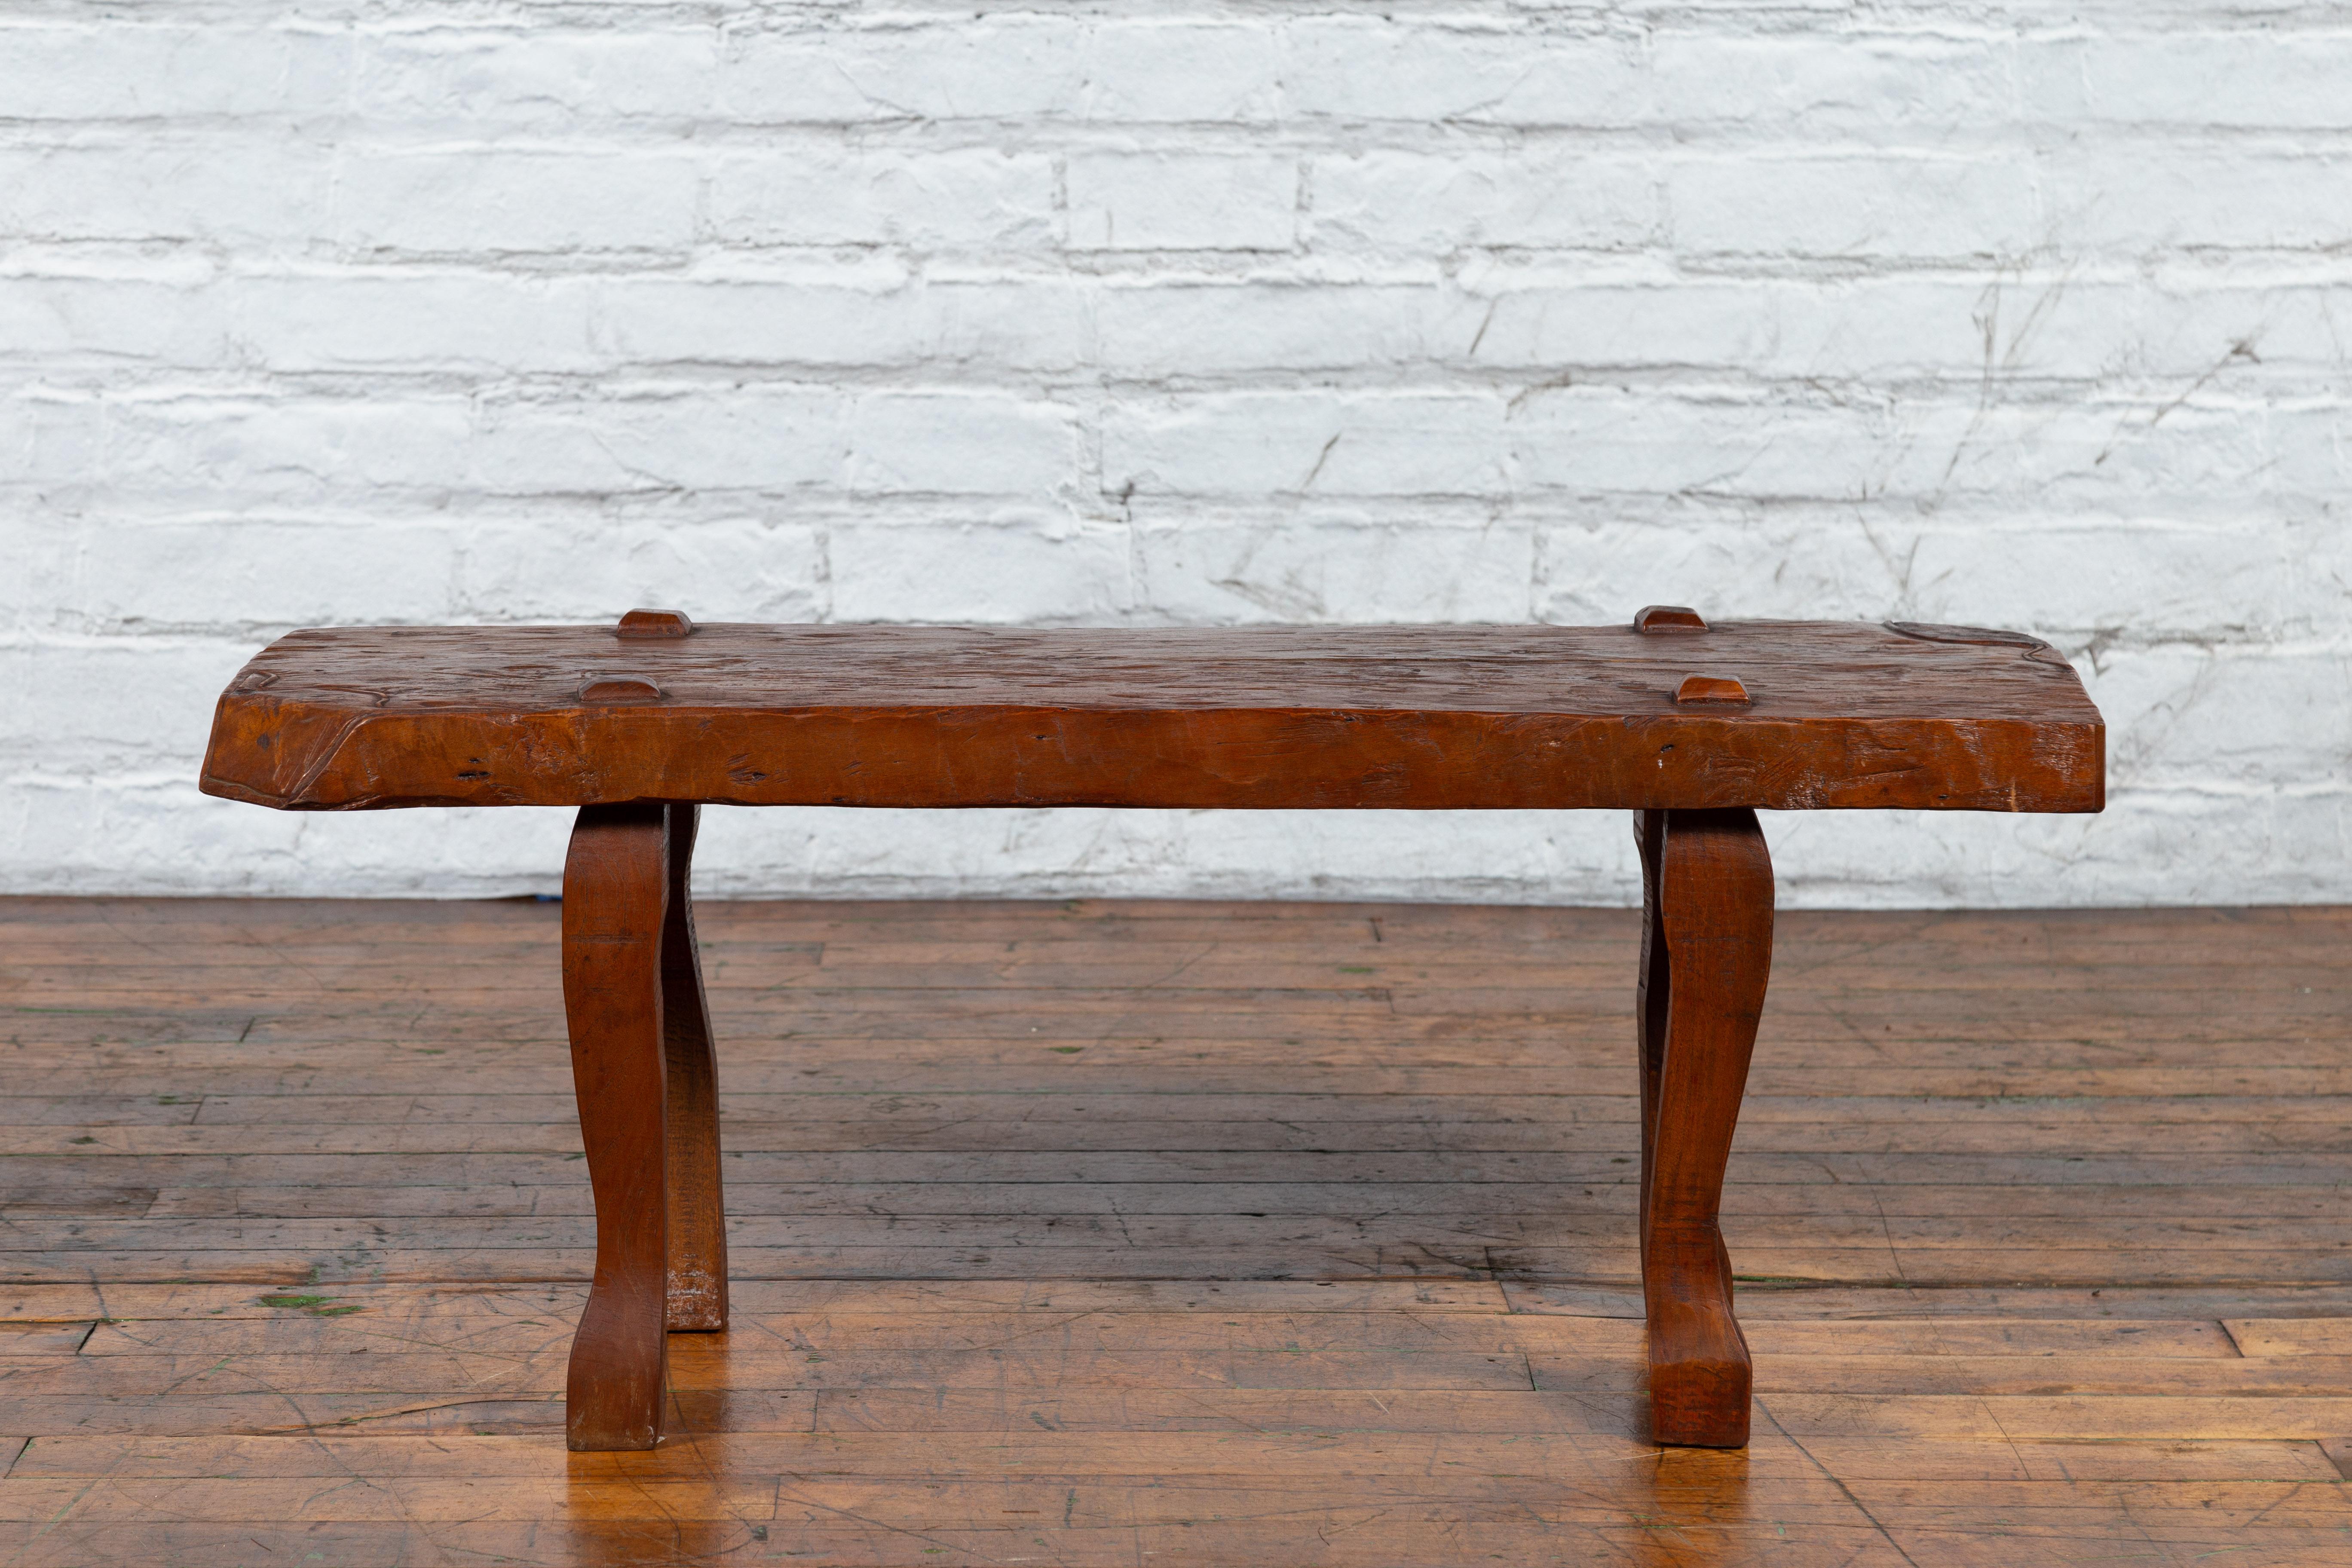 Arts and Crafts Javanese Arts & Crafts Teak Table with Recessed Legs and Distressed Appearance